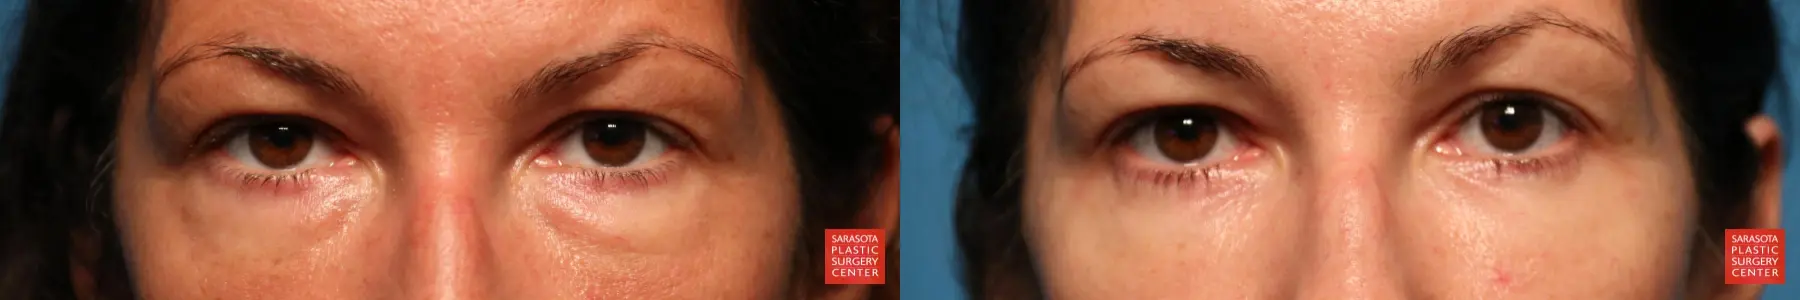 Eyelid Surgery: Patient 19 - Before and After  